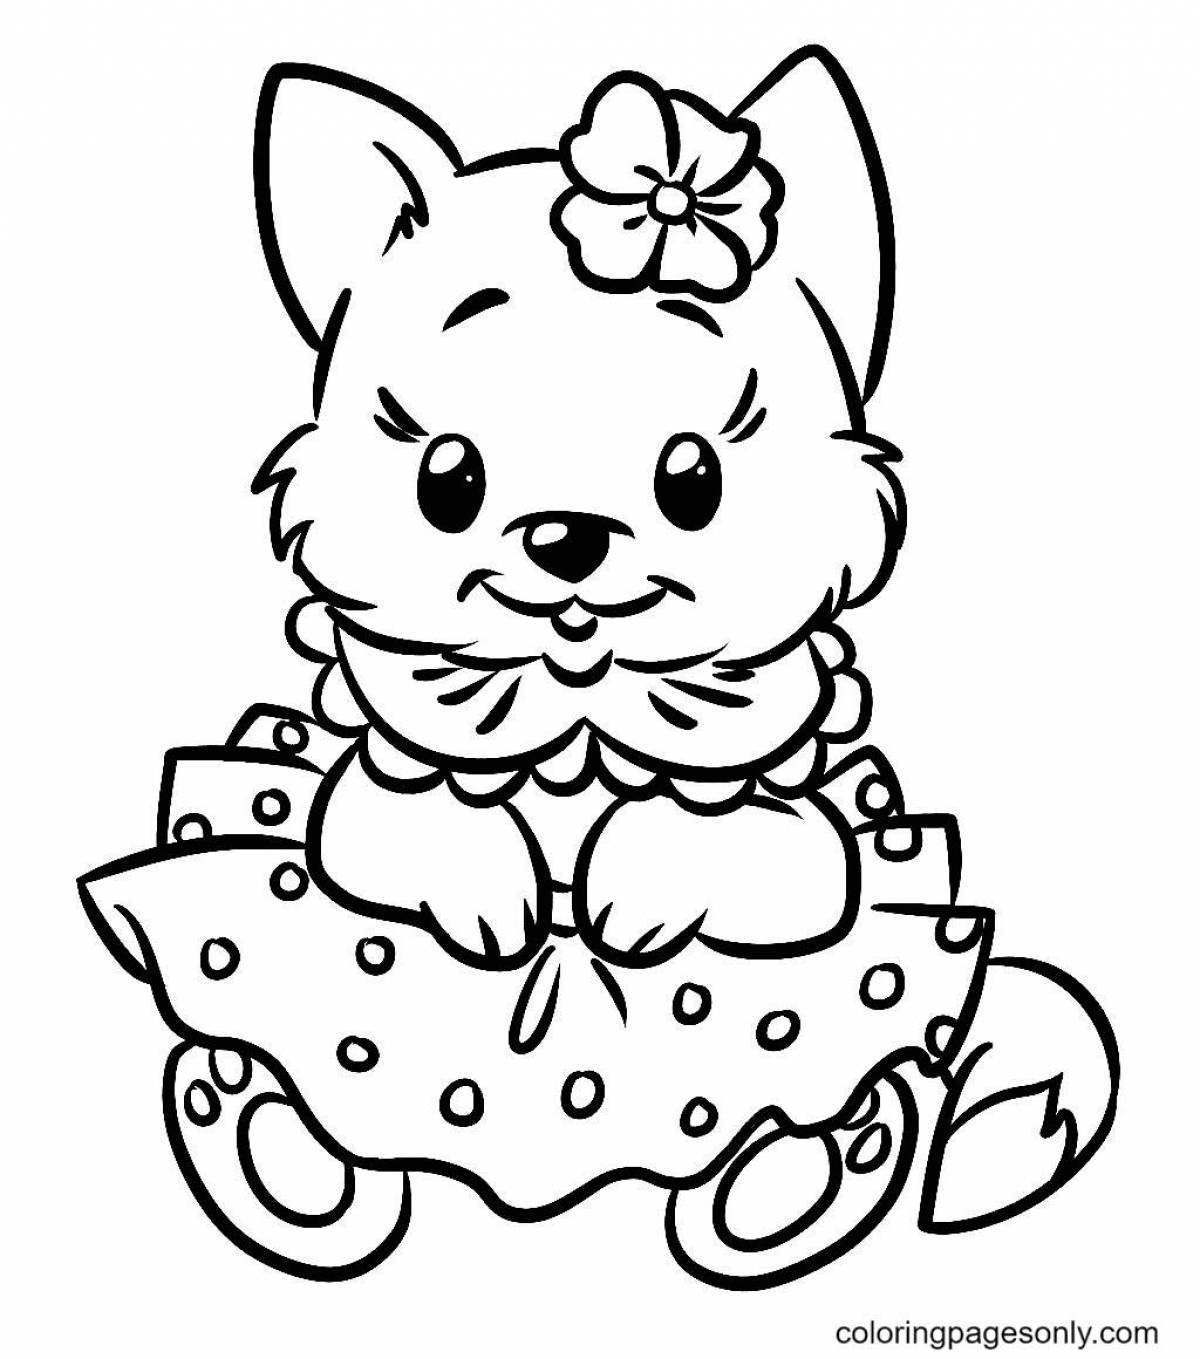 Happy coloring page doggie kitties for kids